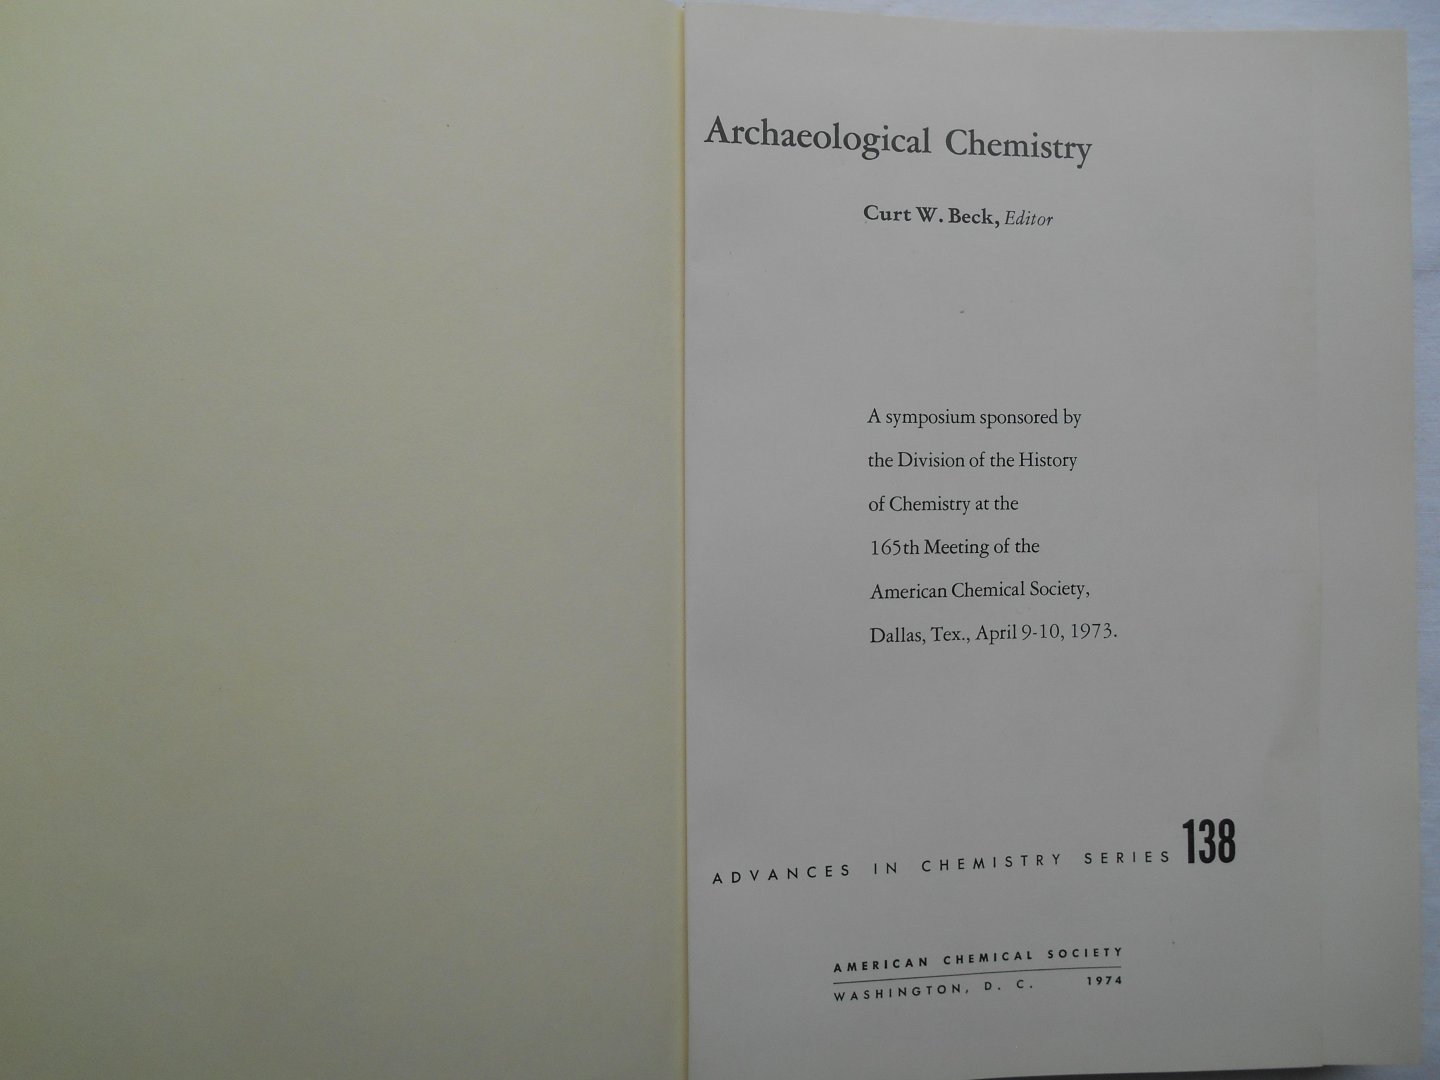 Beck, Curt W. - Archaeological Chemistry (Advances in Chemistry Series)